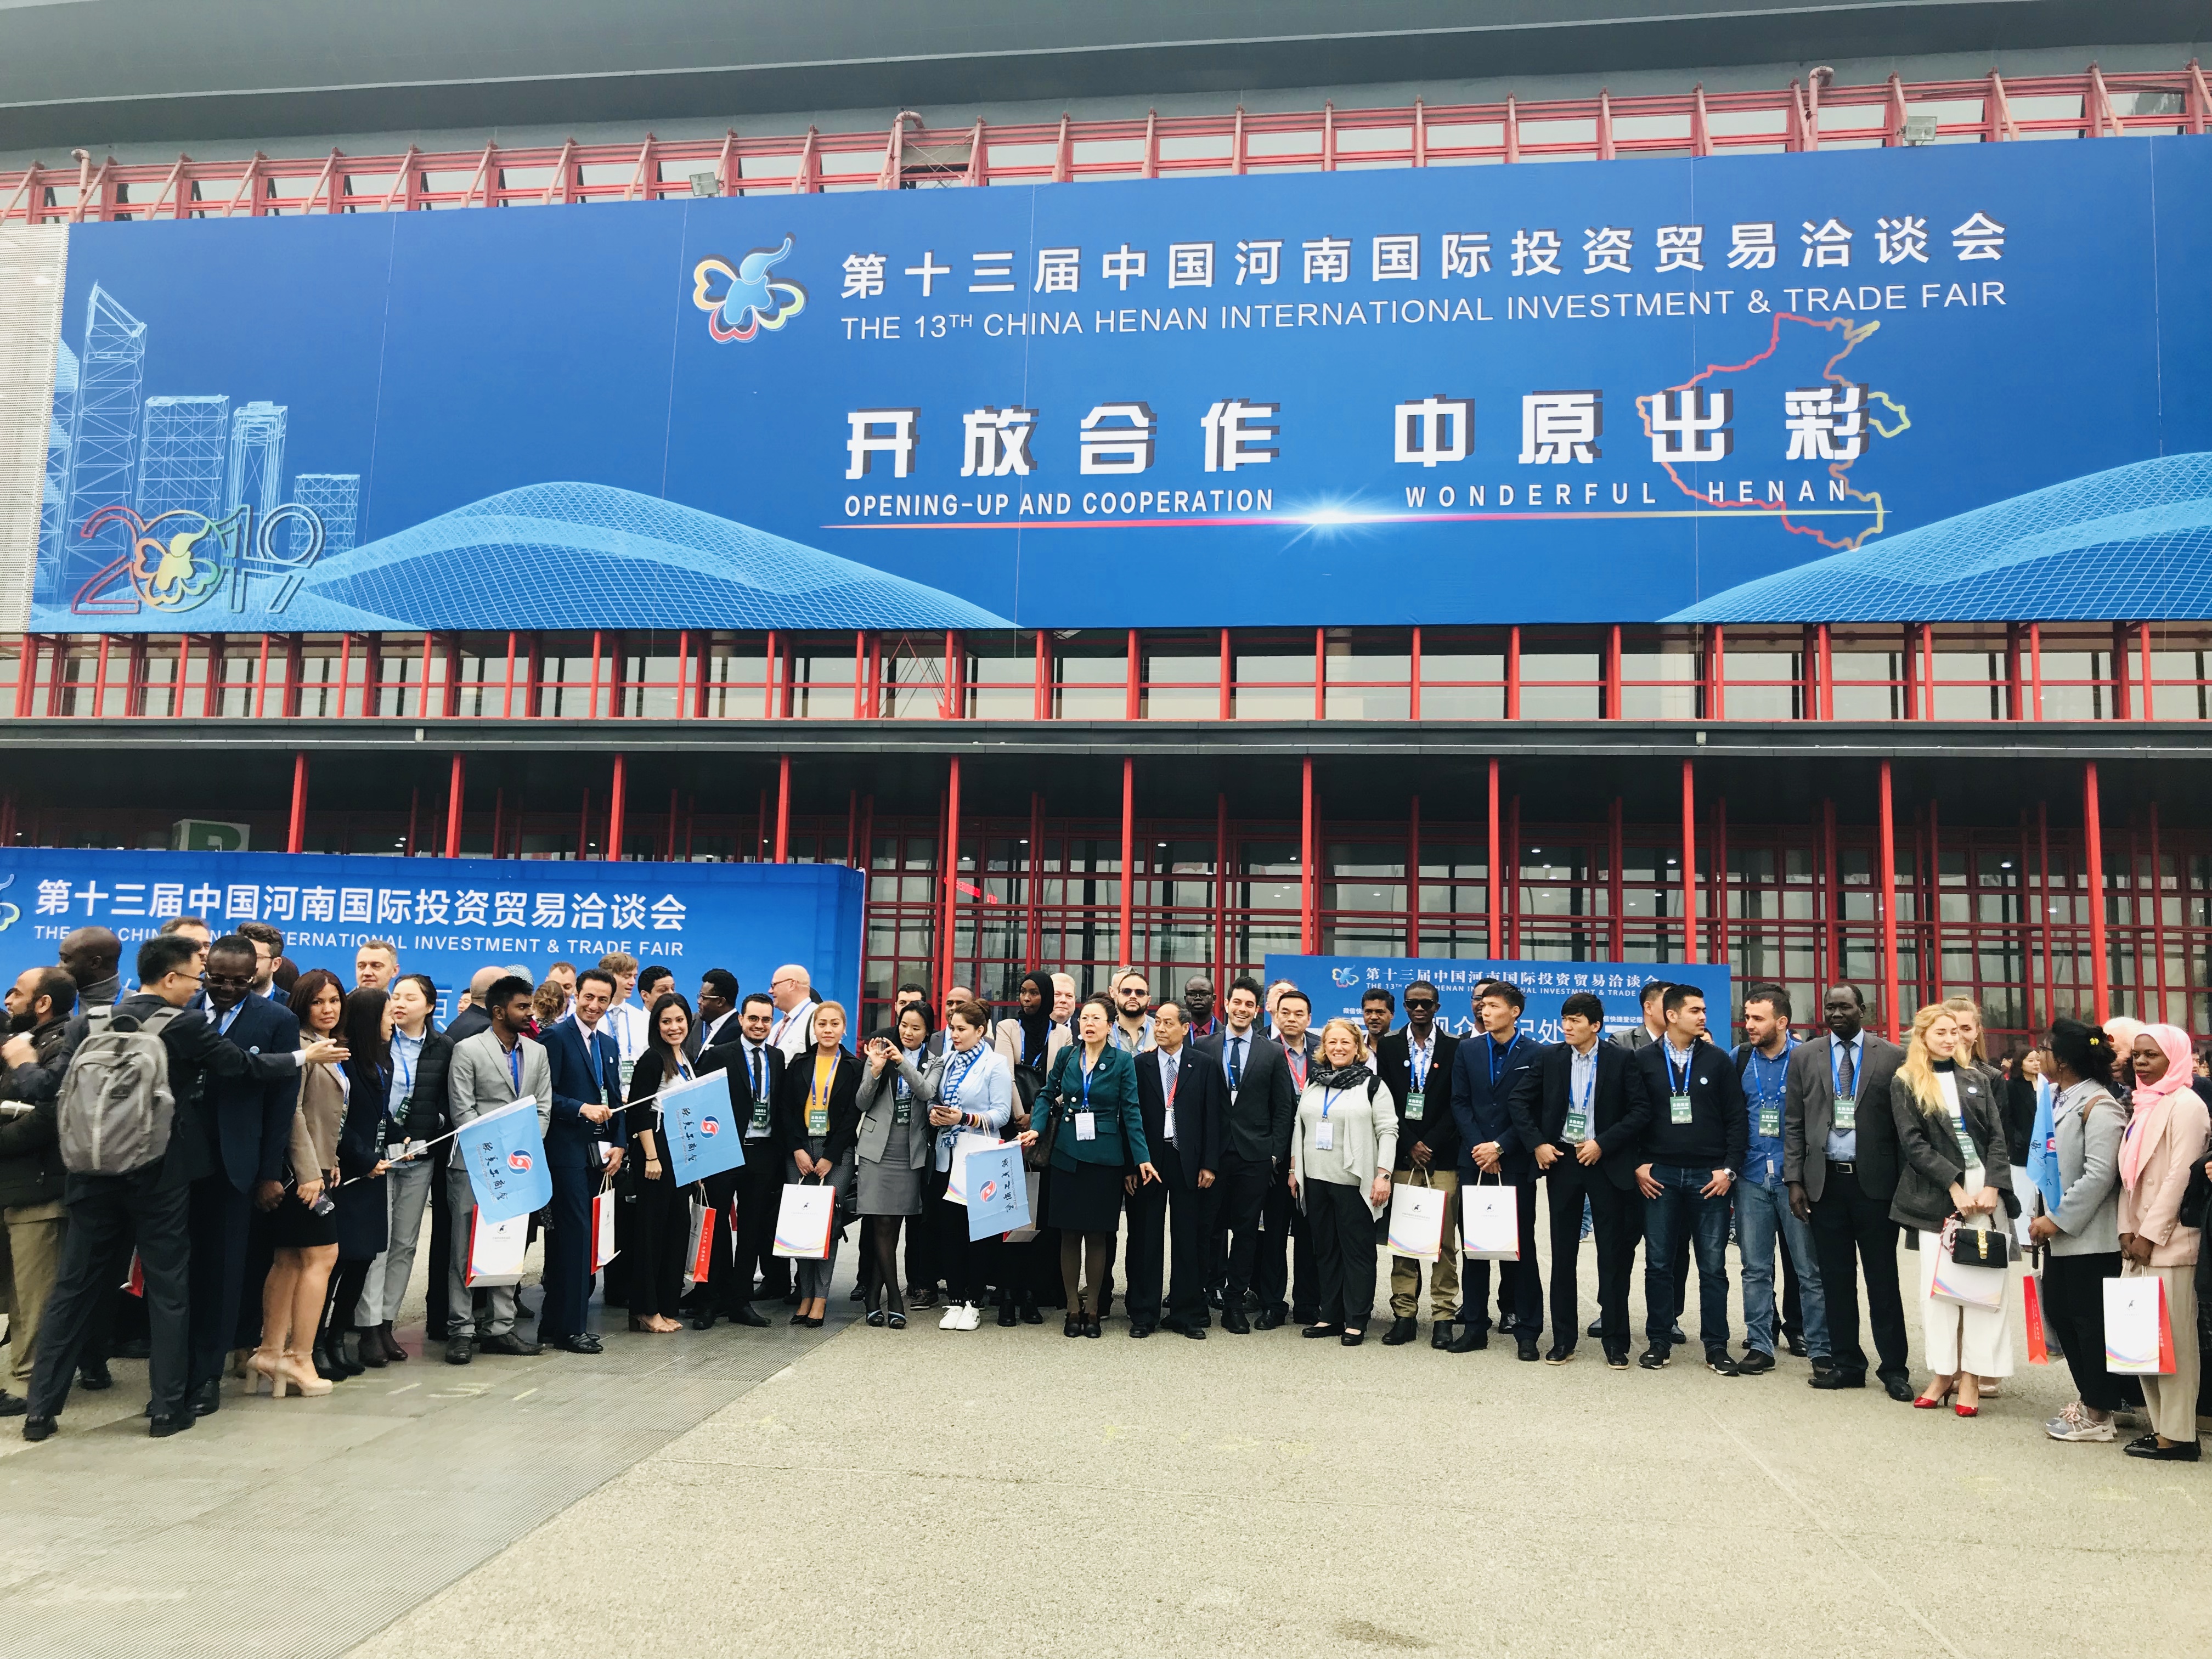 The 13th China Henan International Investment and Trade Fair